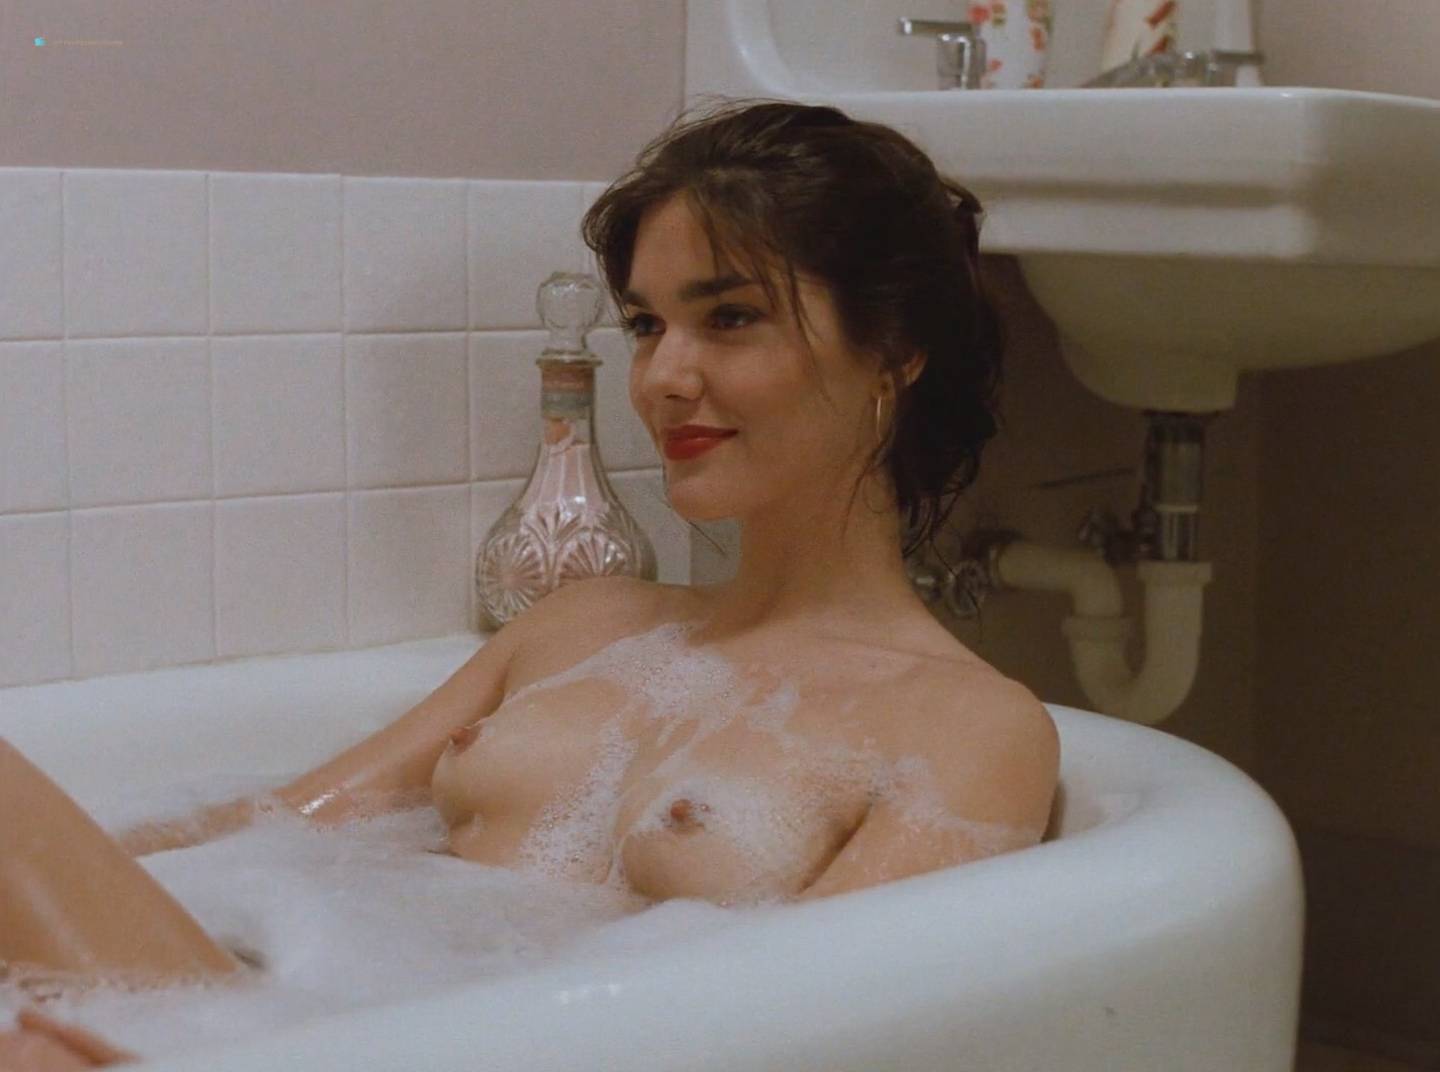 Laura Harring nude topless in the tube - Silent Night Deadly Night 3 (1989) HD 1080p (9)